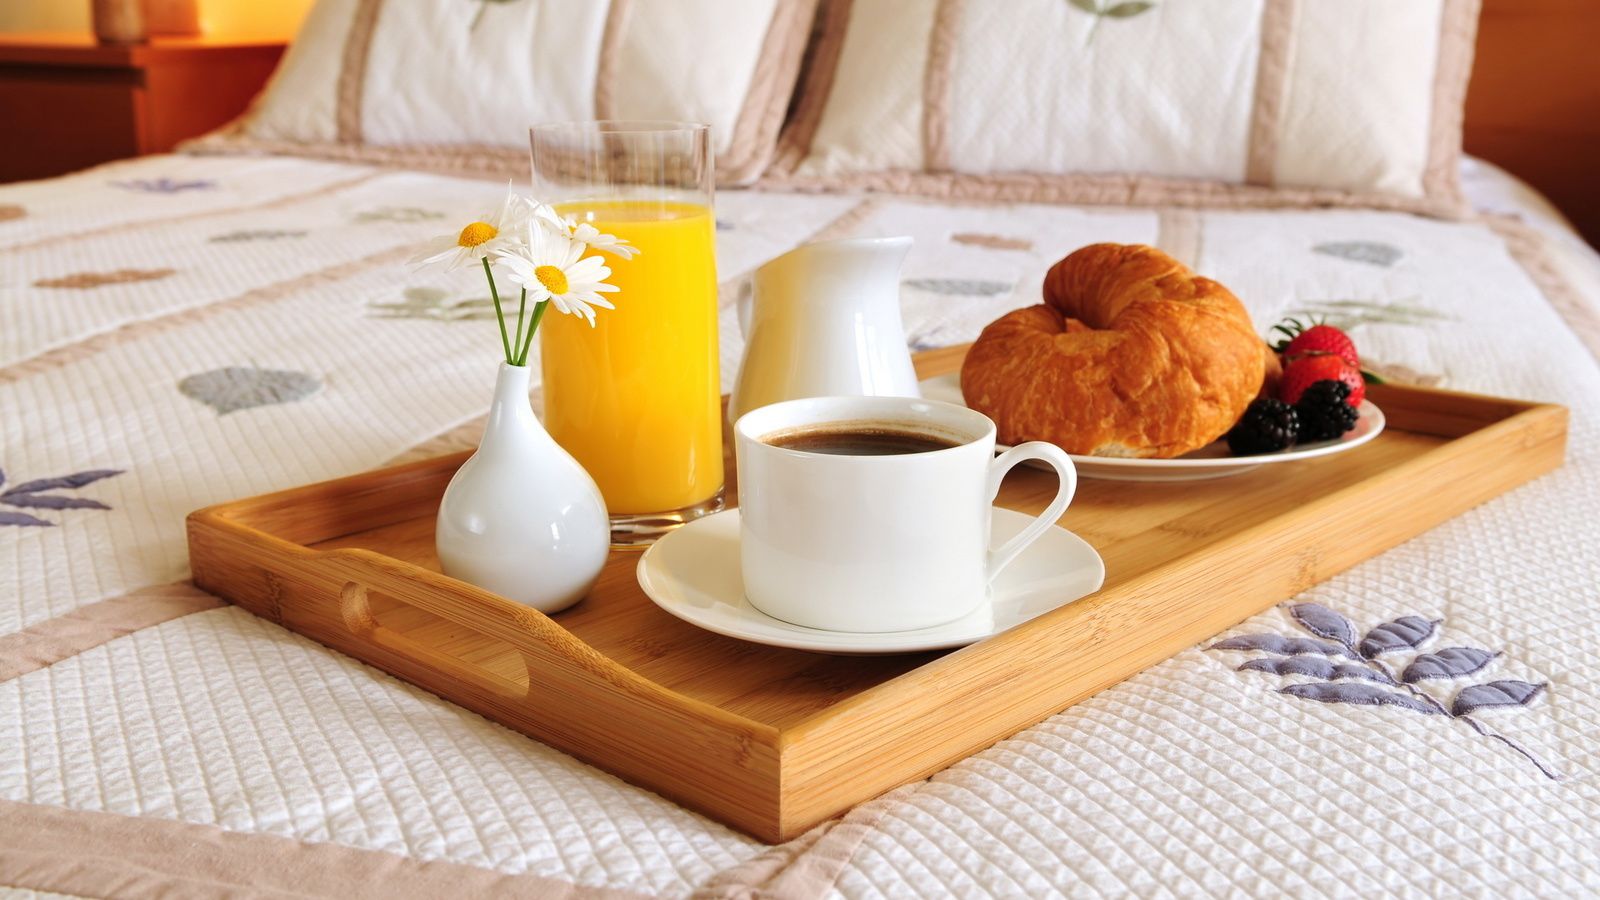 ob_1a1367_good-morning-with-bed-tea-hd-w